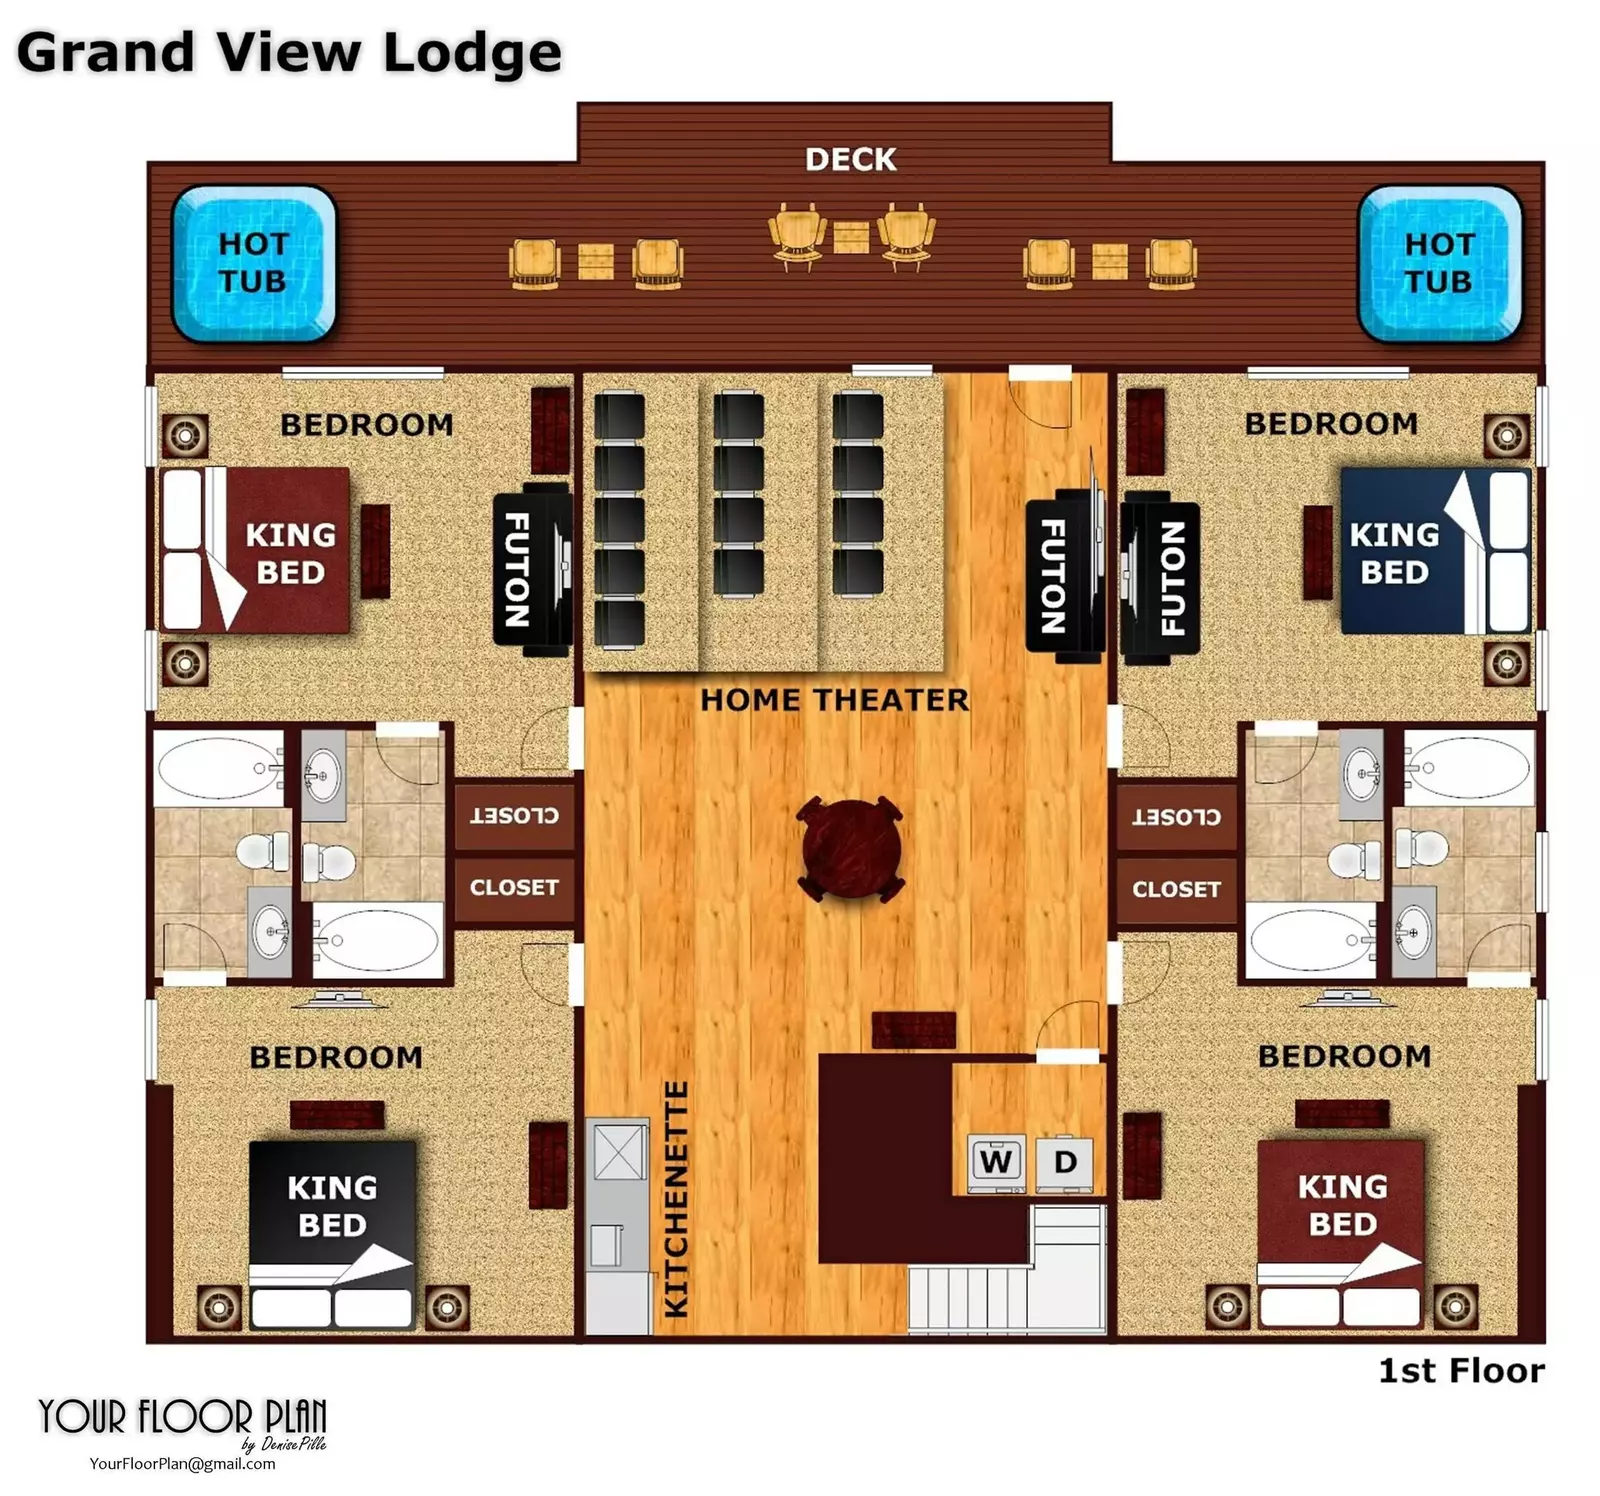 Floor plan of the second floor of Grand View Lodge cabin in Pigeon Forge